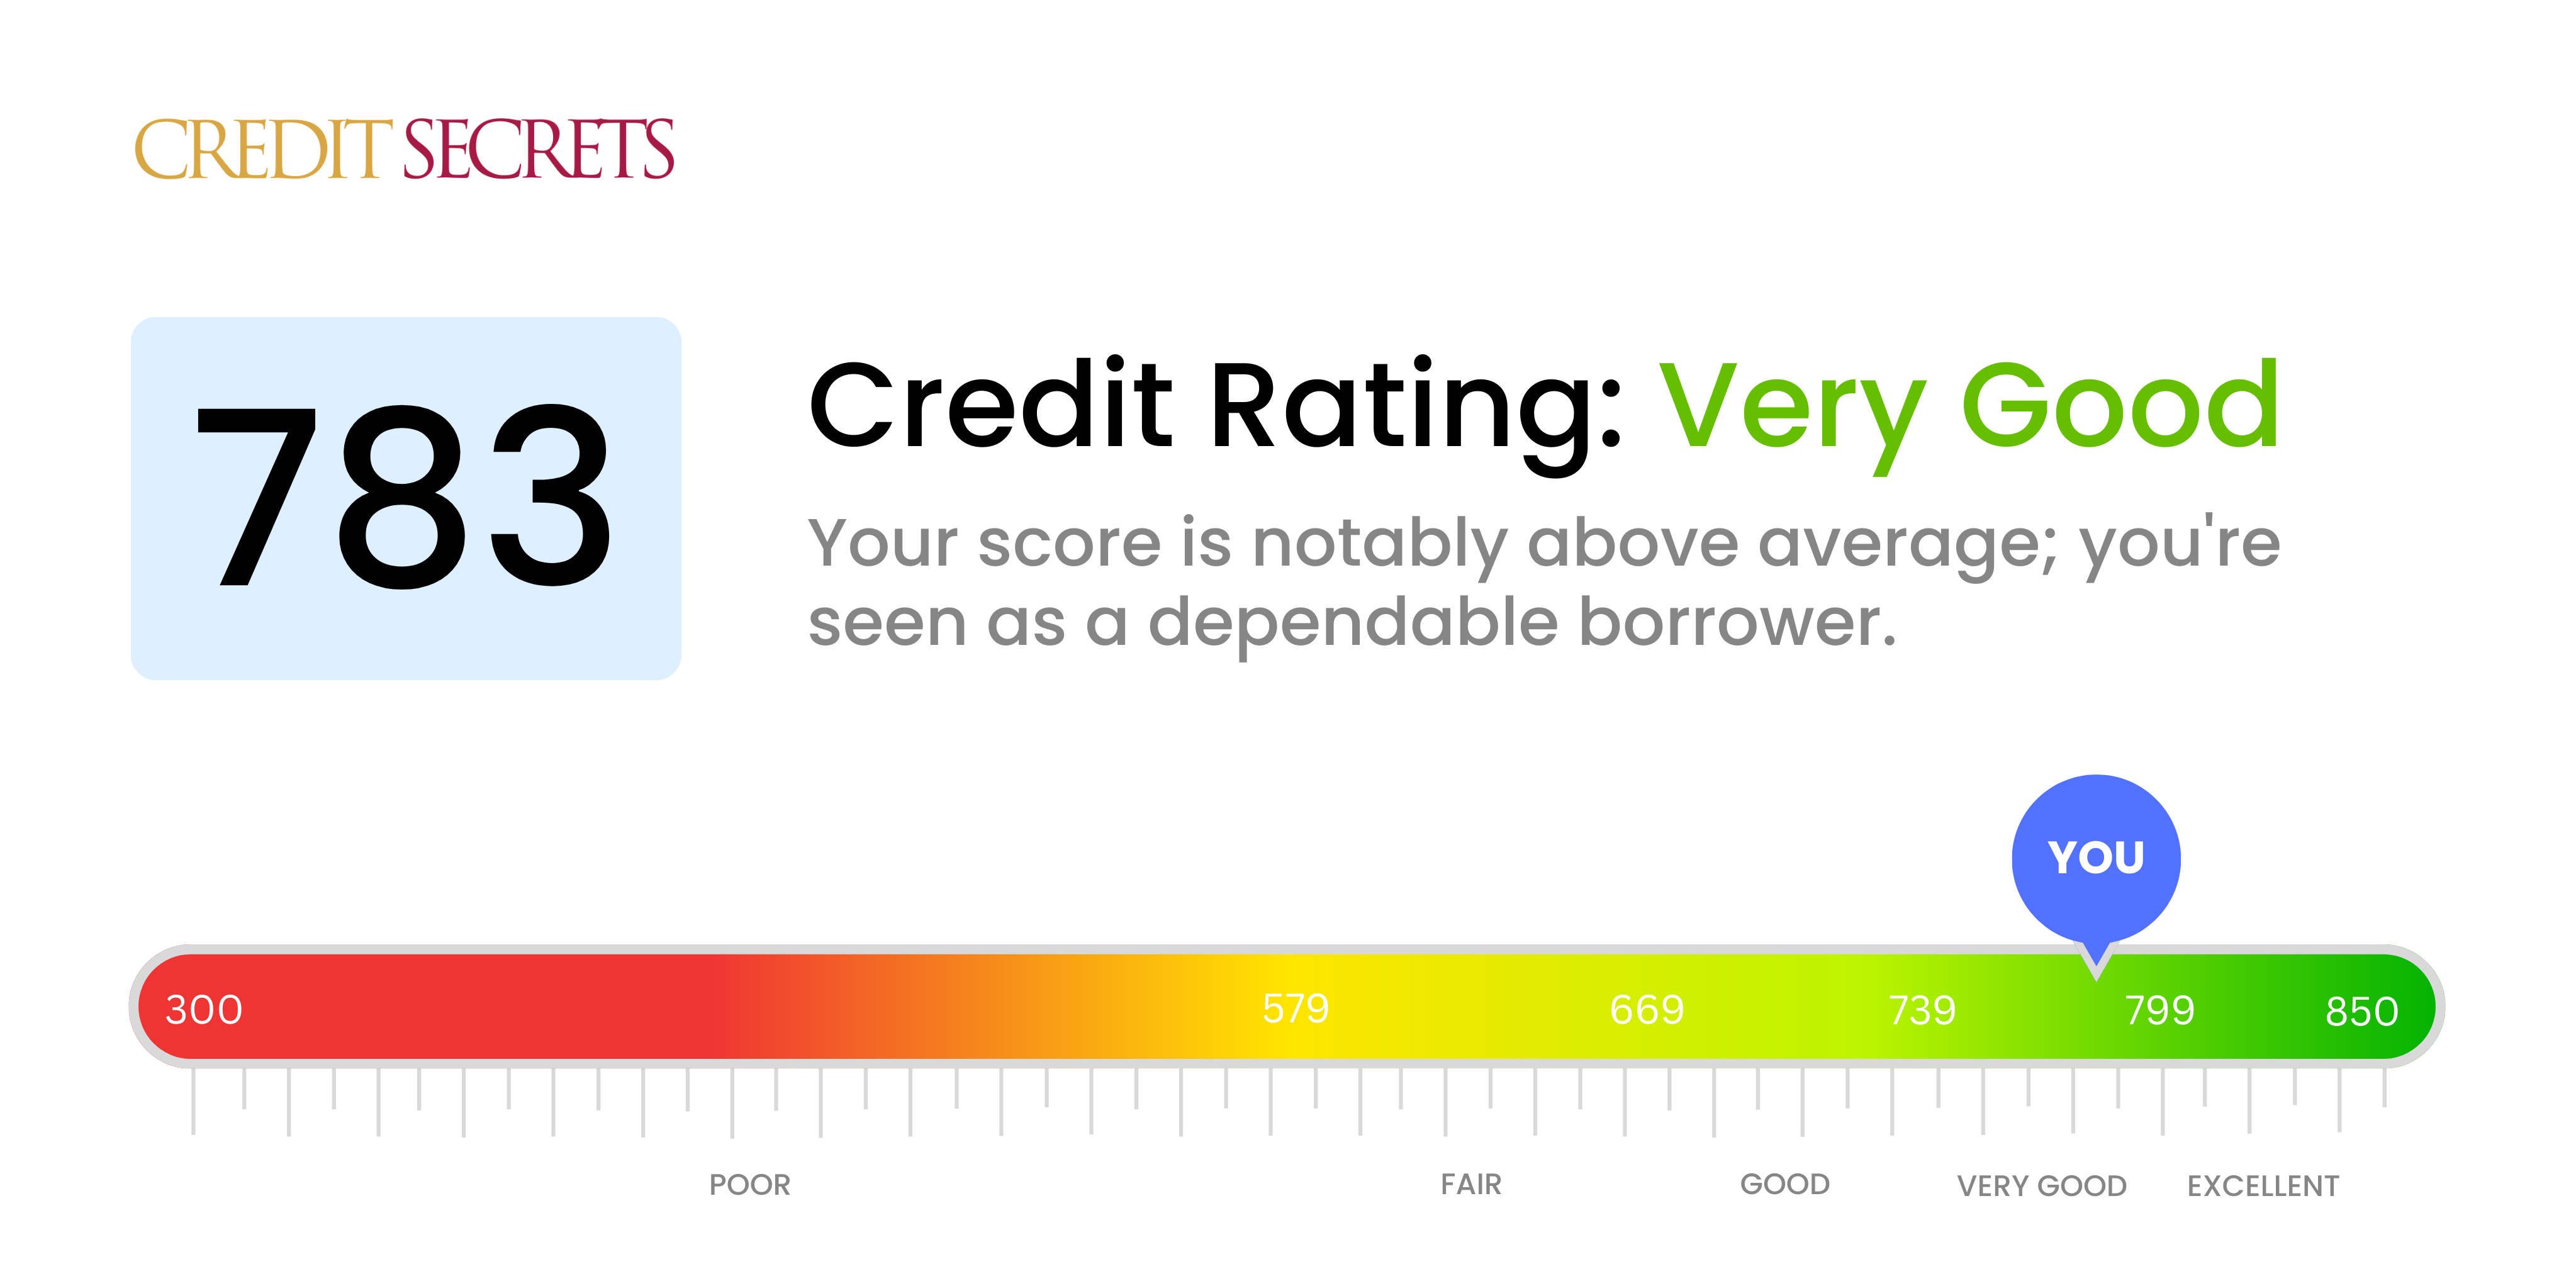 Is 783 a good credit score?